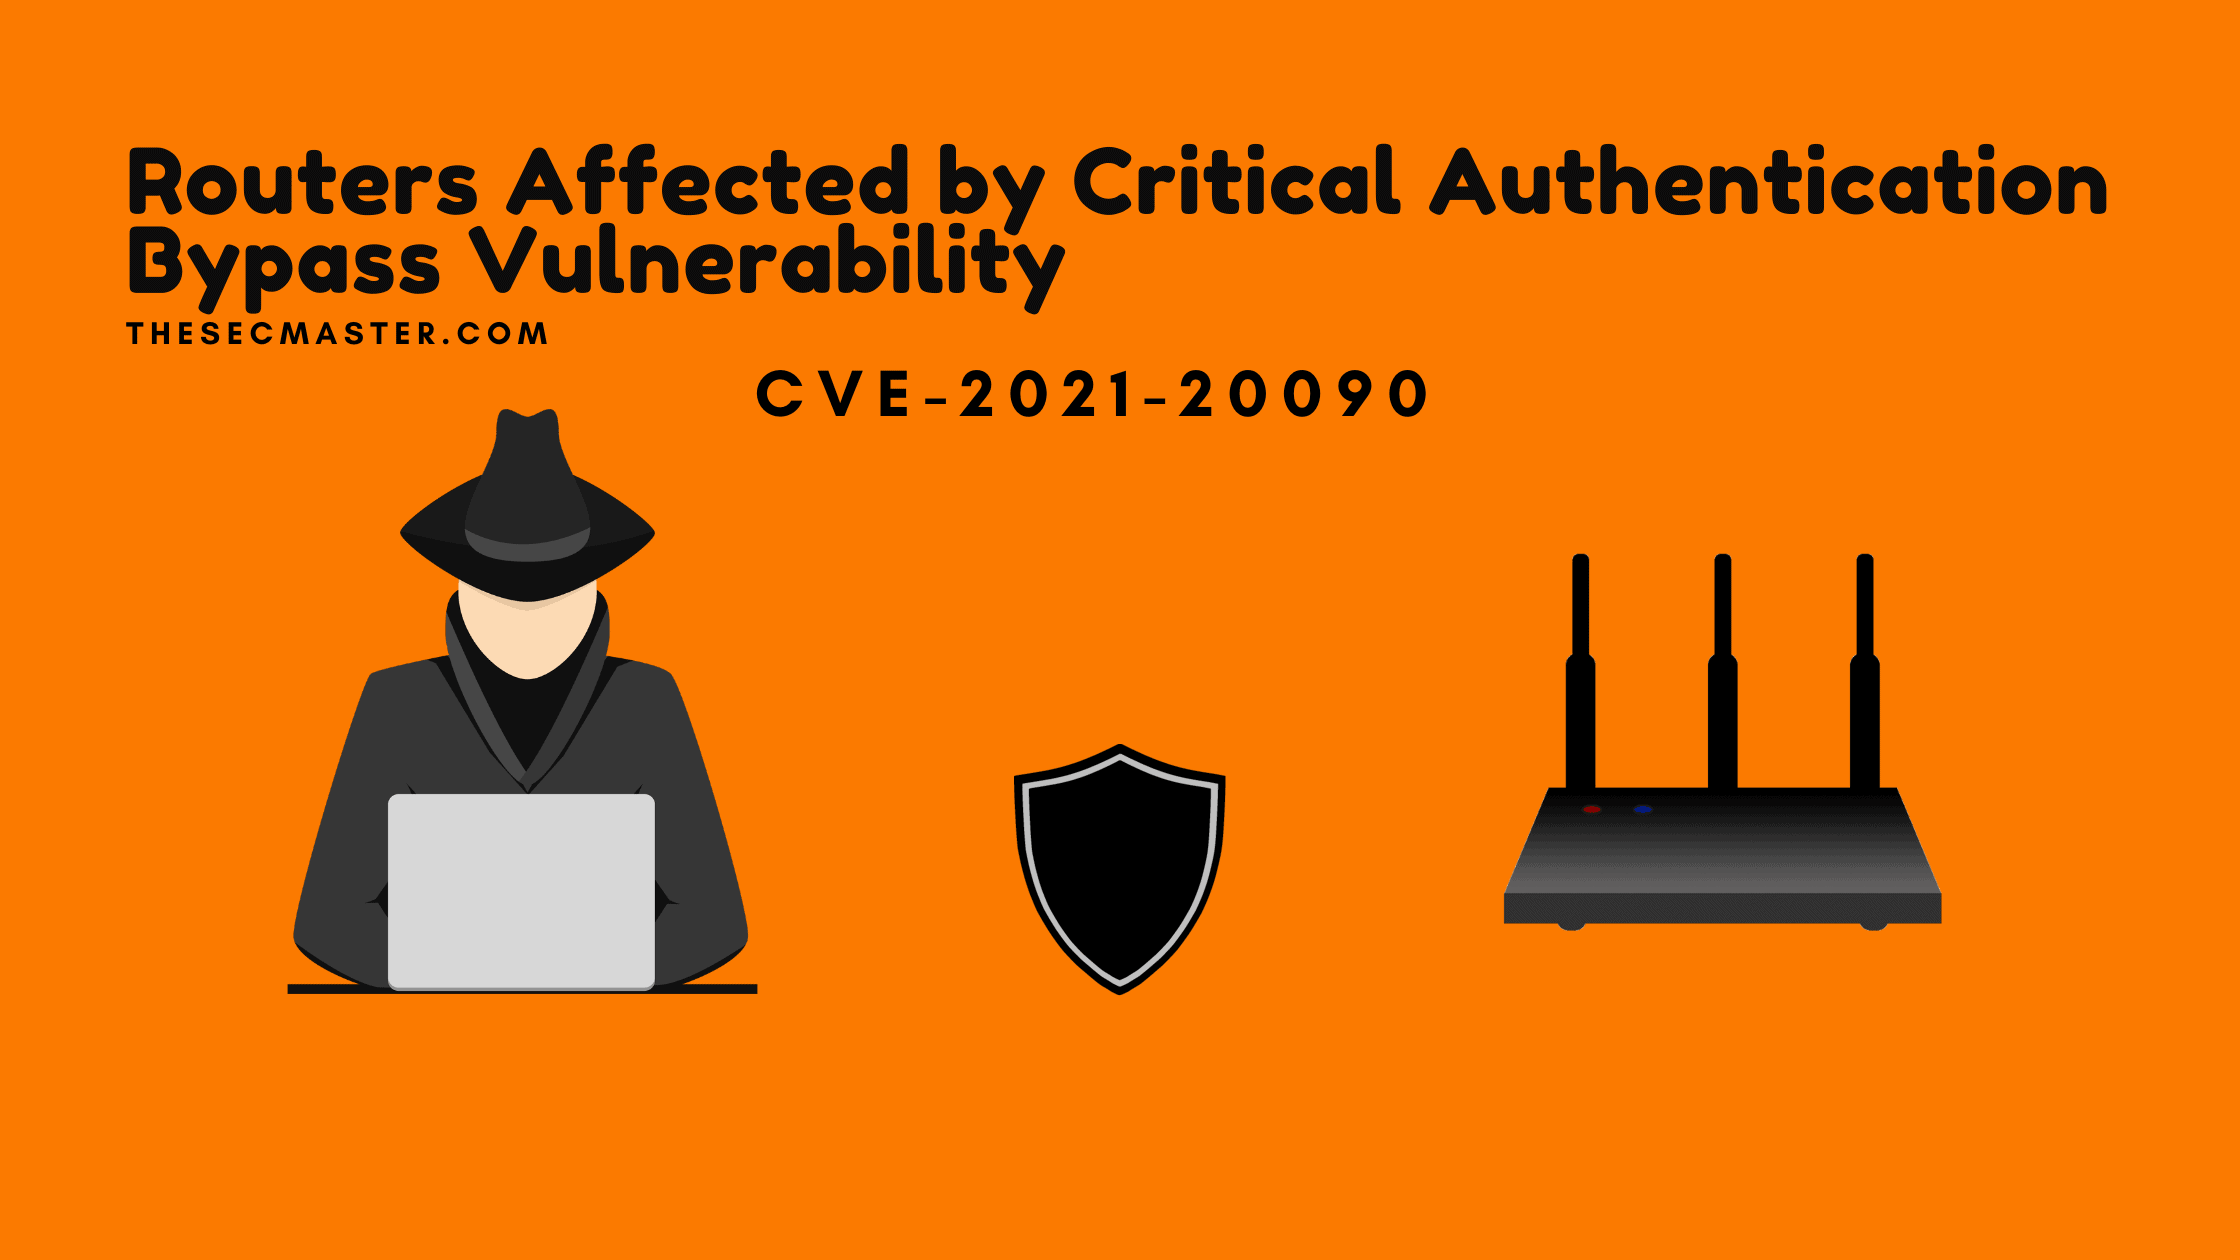 Routers Affected By Critical Authentication Bypass Vulnerability Cve 2021 20090